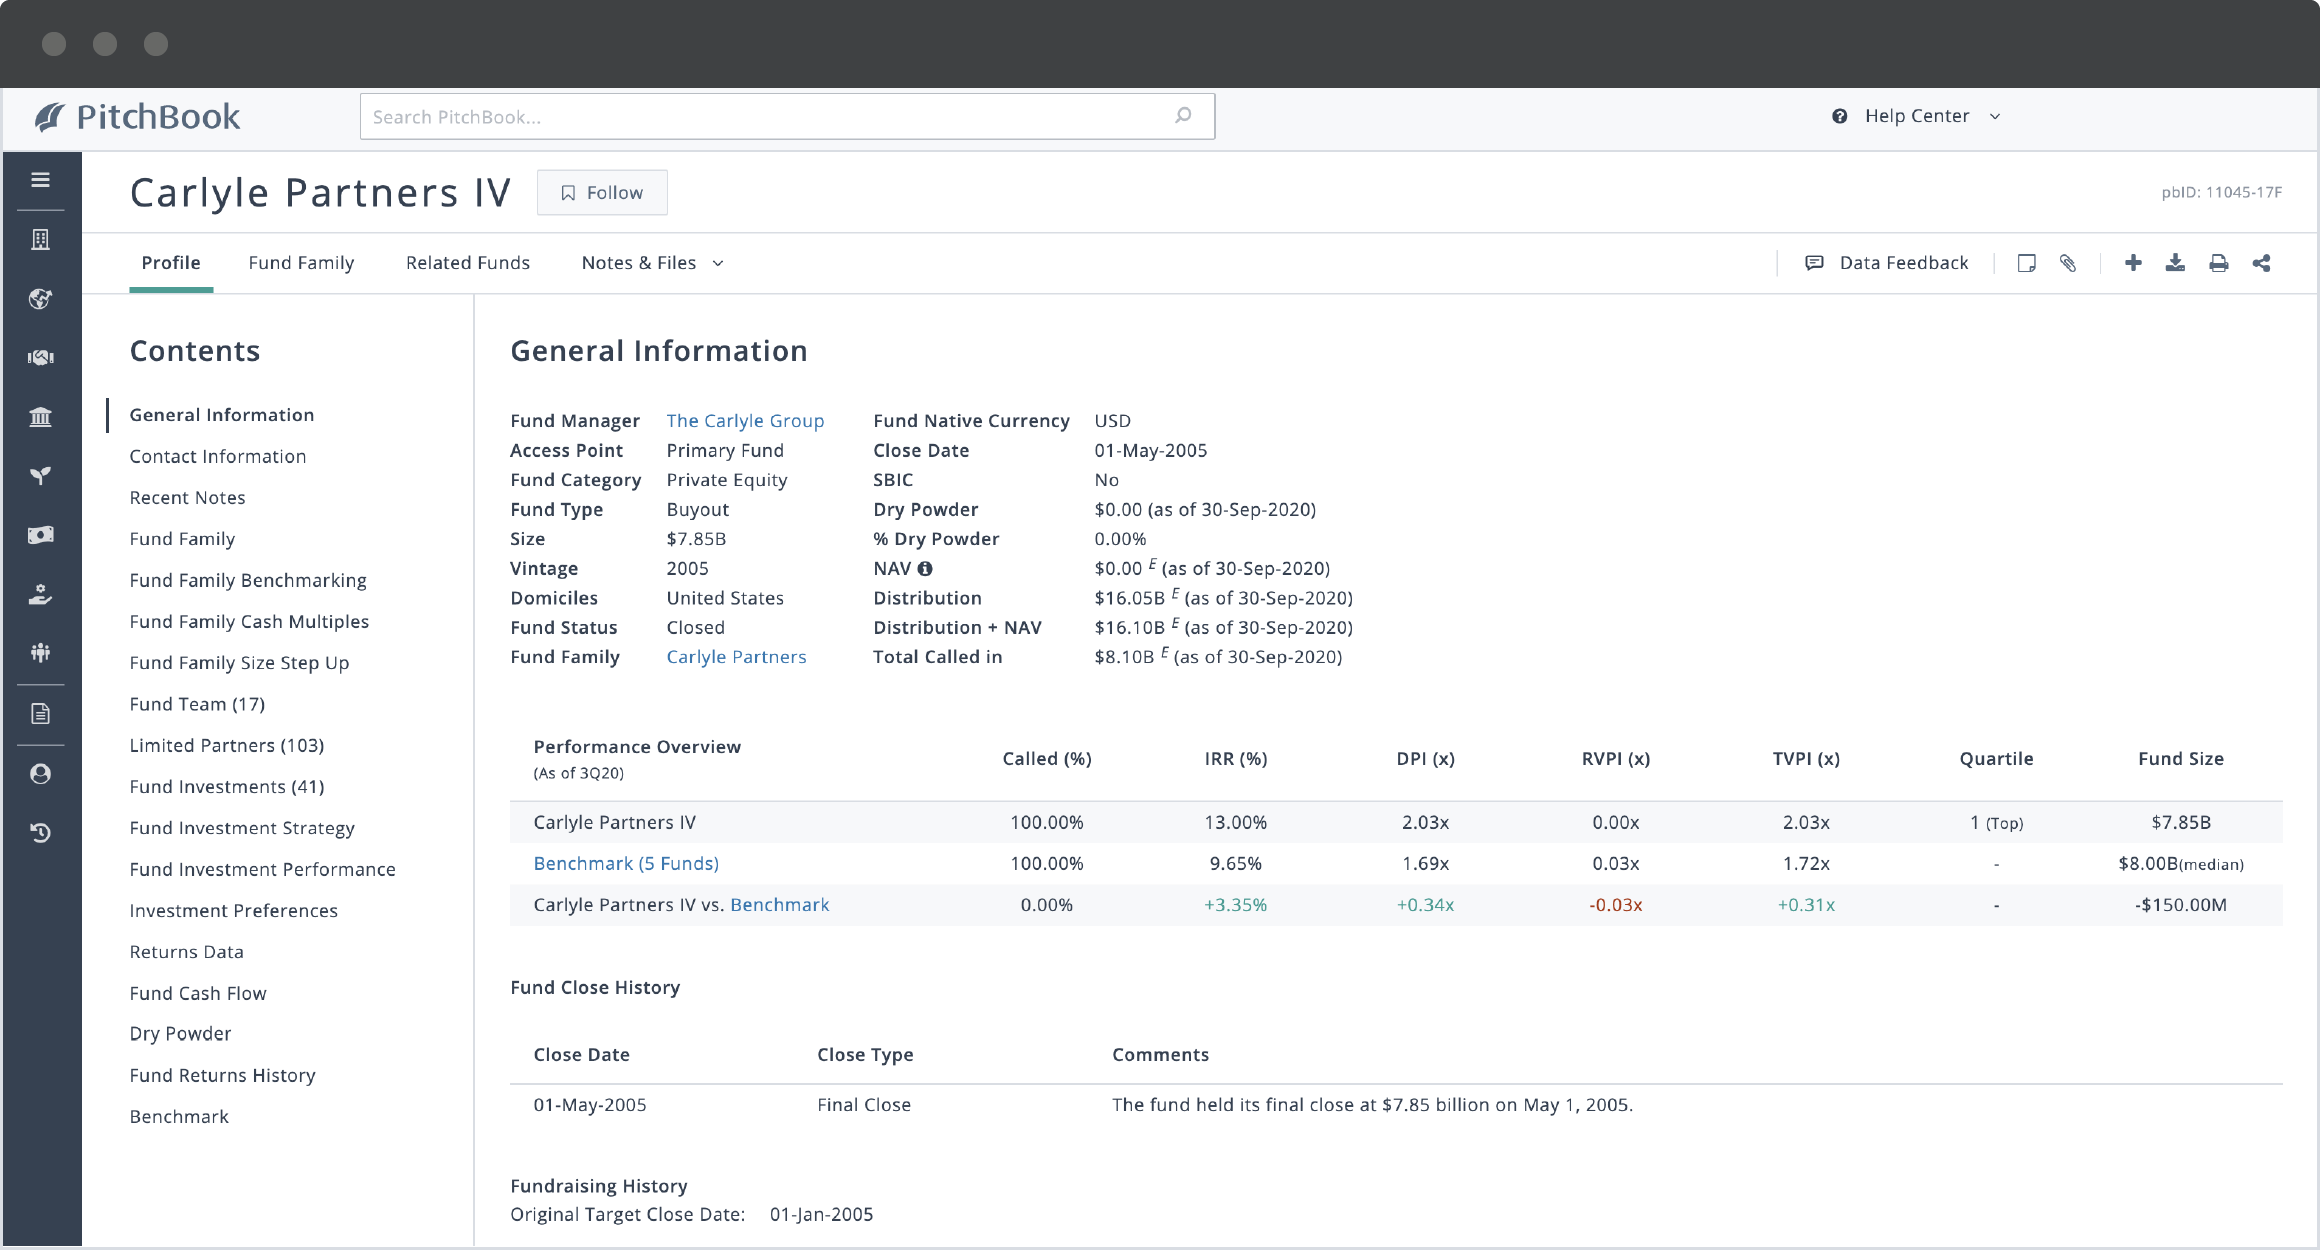 PitchBook fund profile showing Carlyle Partners IV's general information, including dry power and called capital.